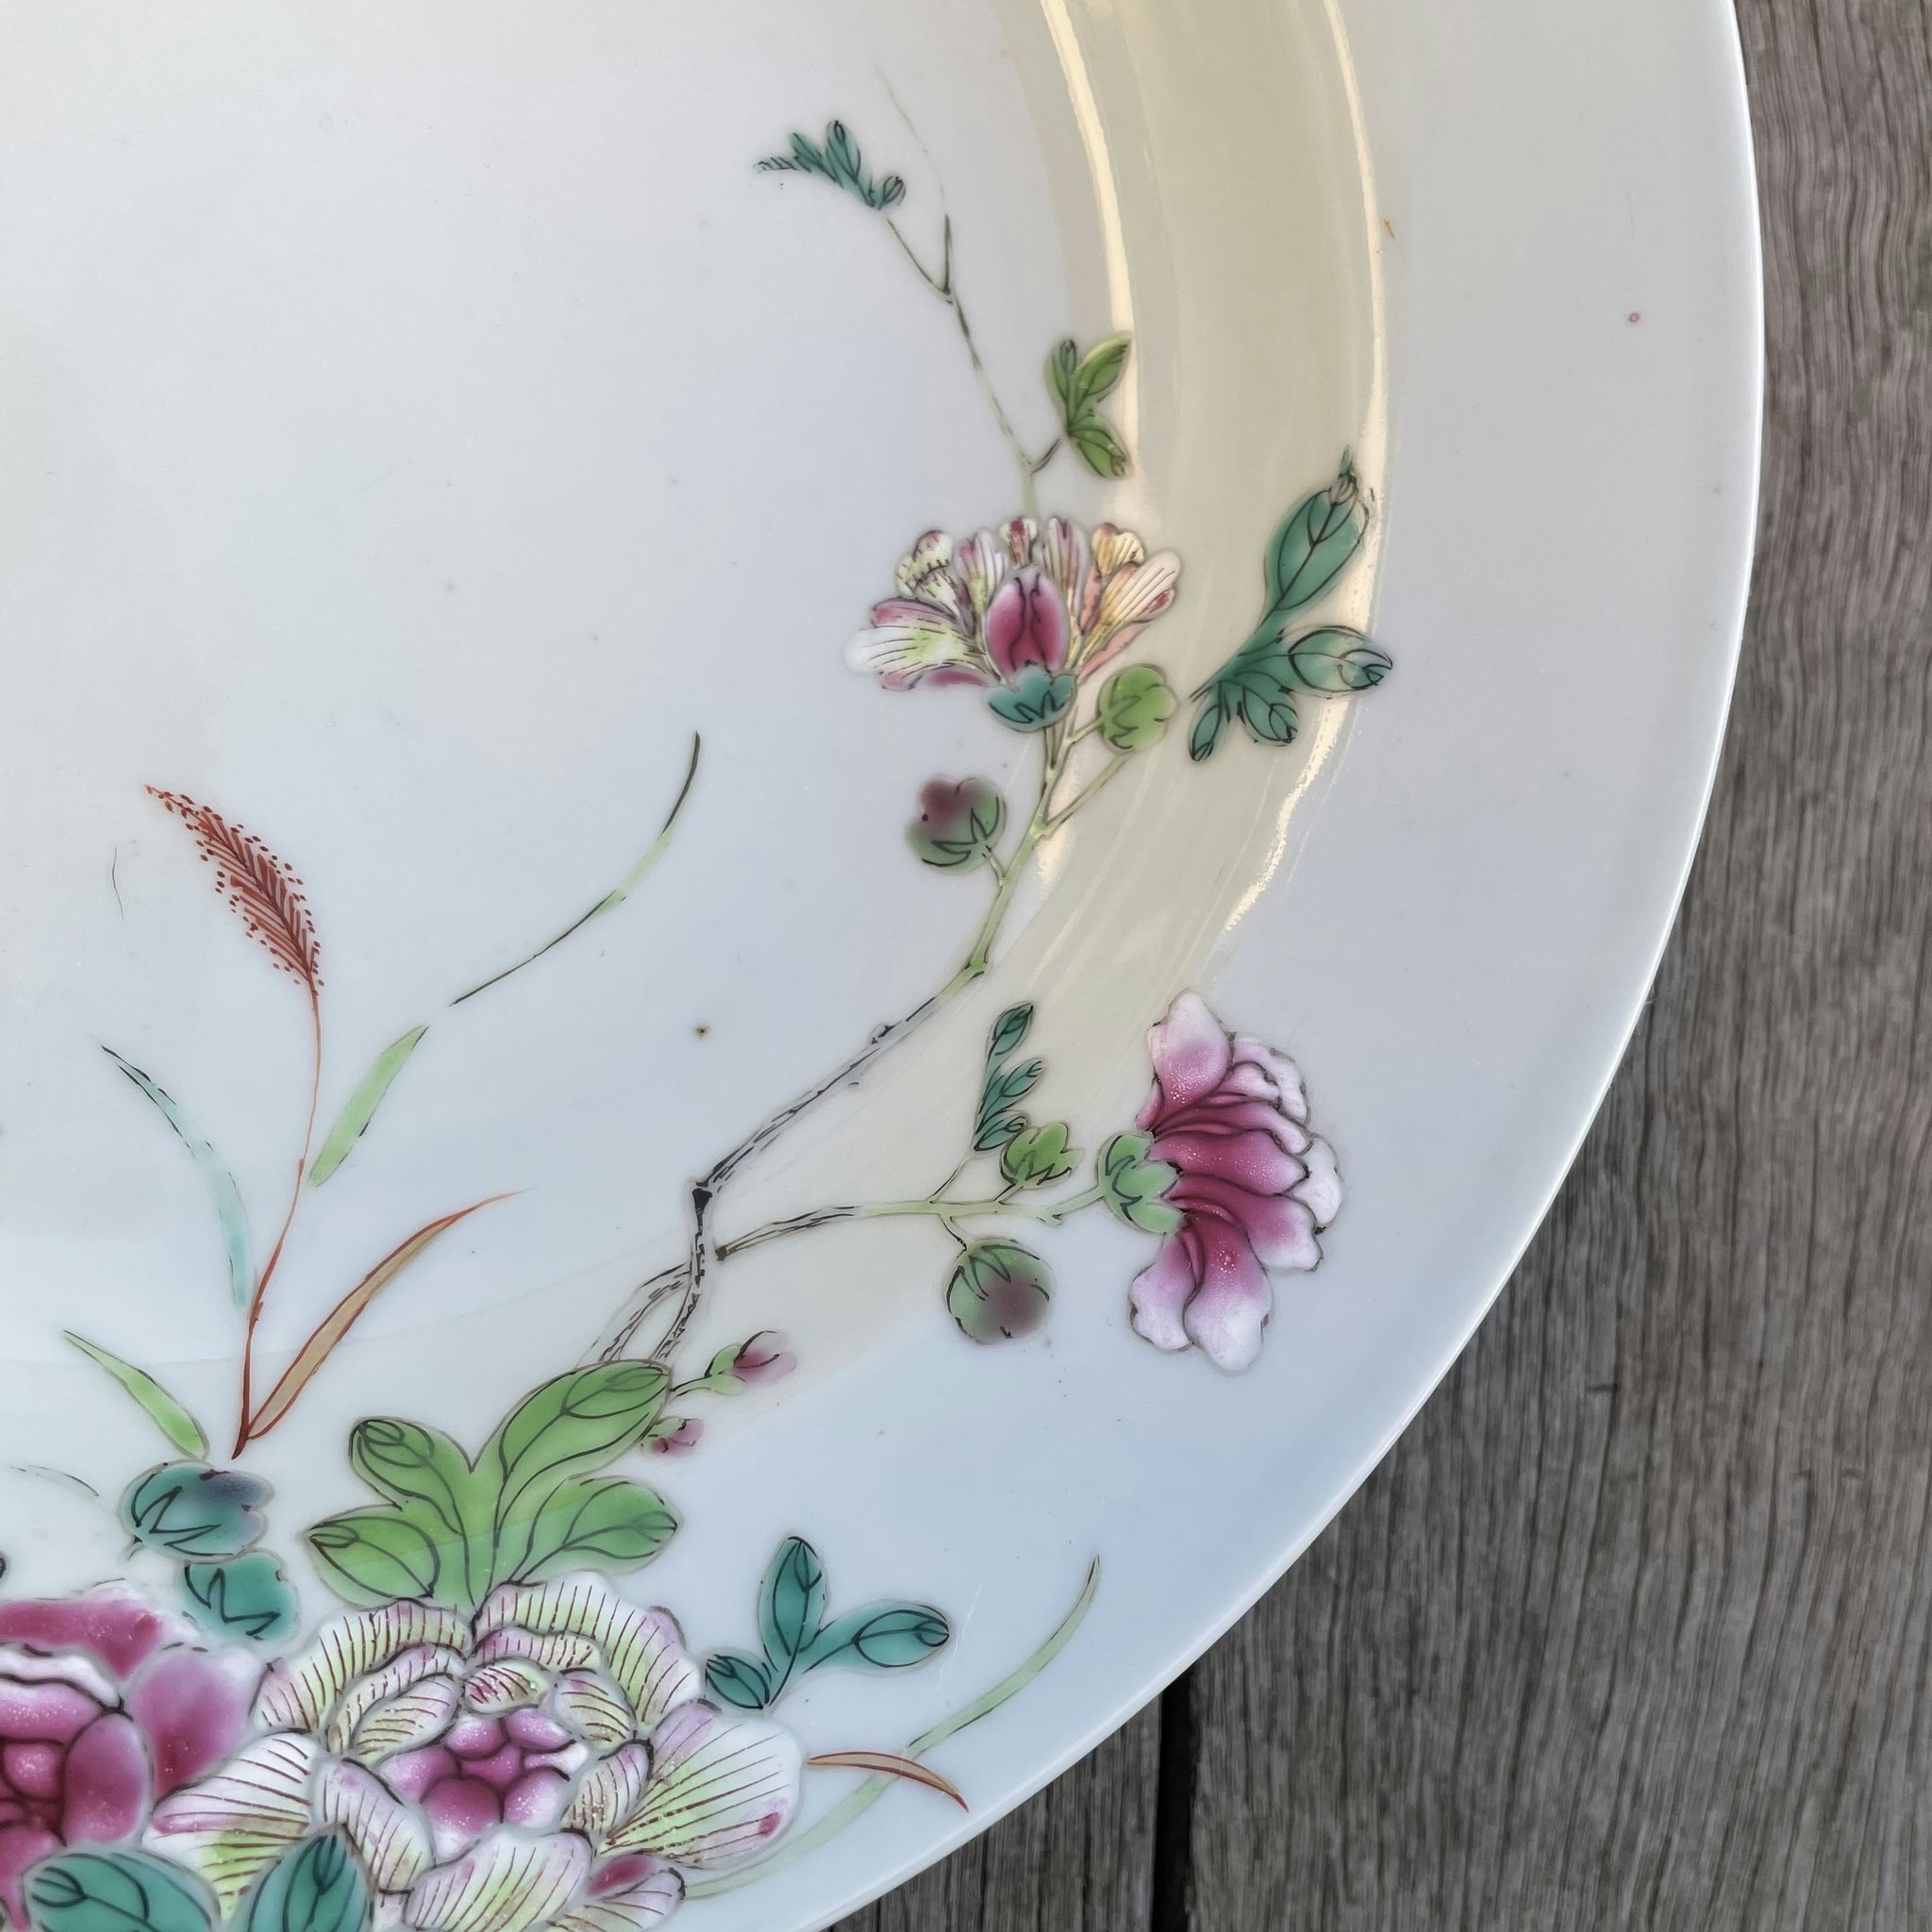 Antique Chinese porcelain deep plate Famille Rose plate early18th C #807